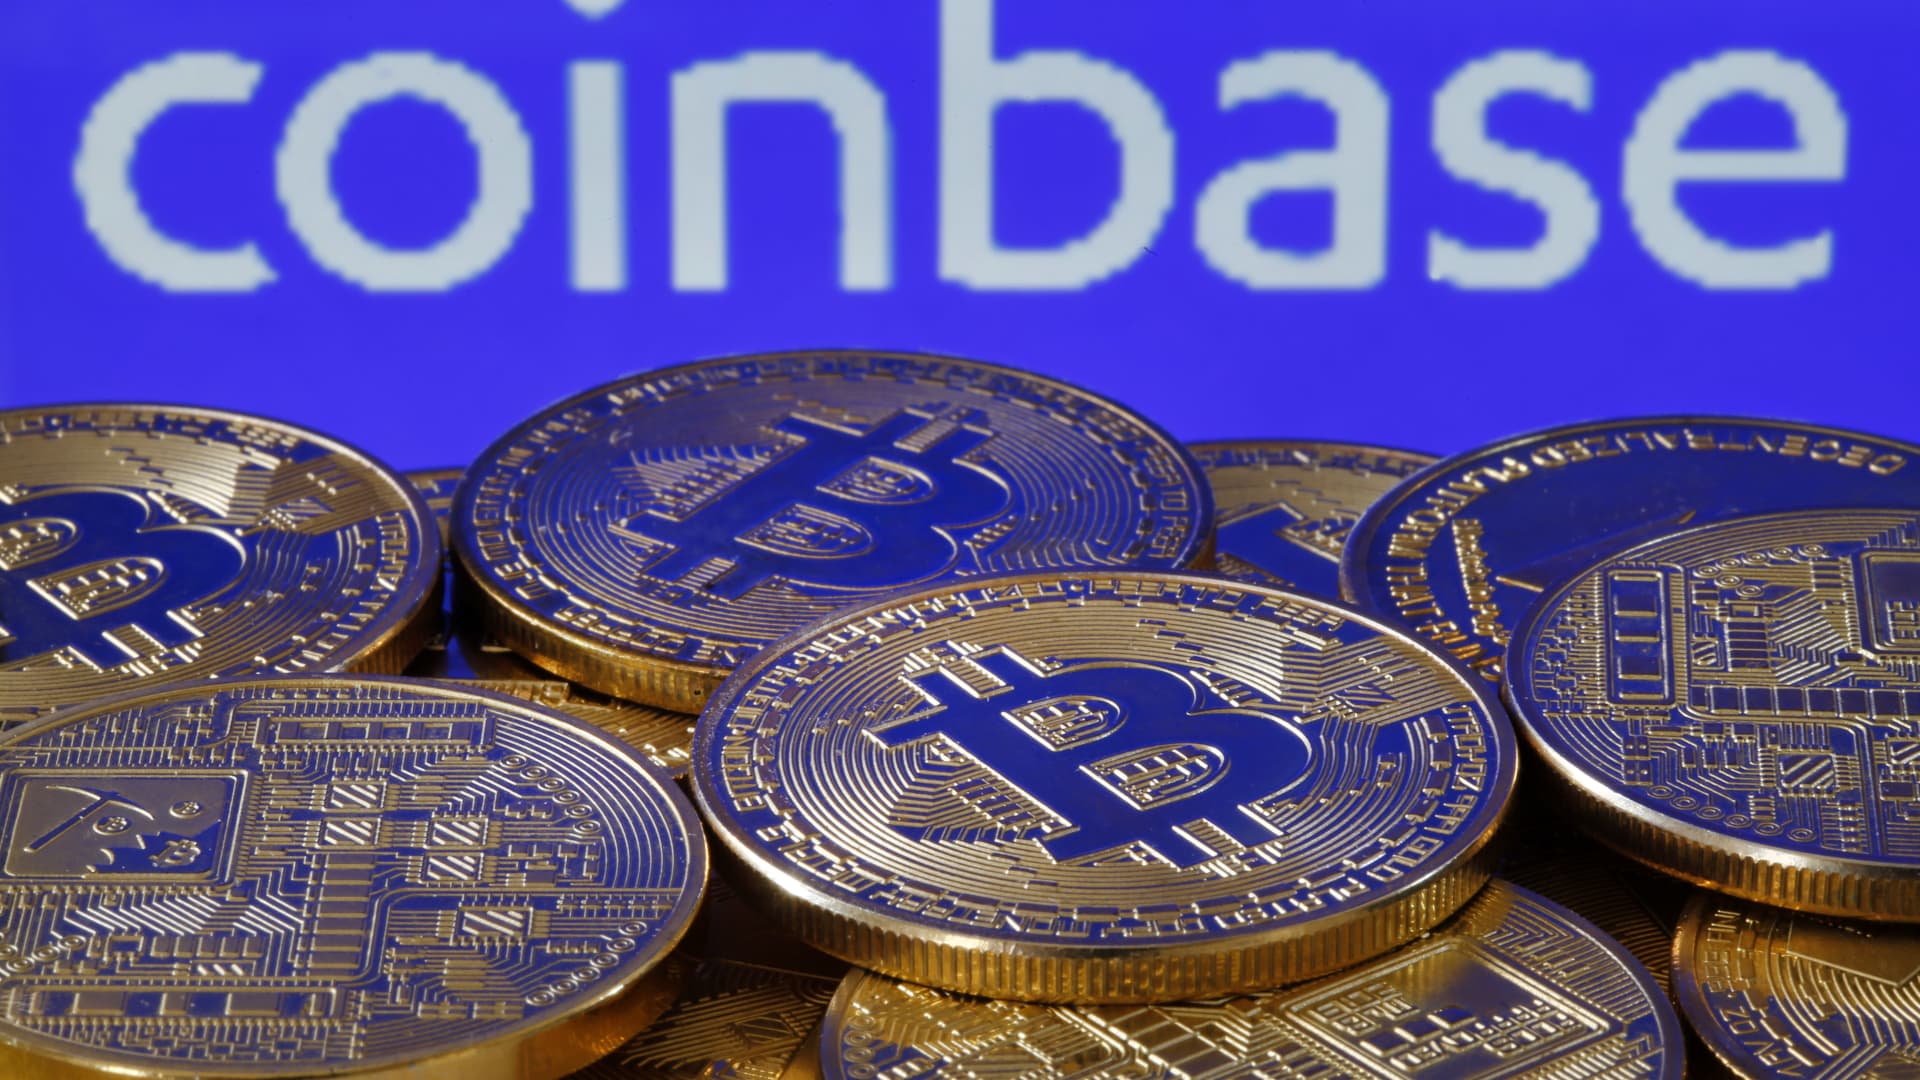 Coinbase jumps 16% after saying it has no exposure to bankrupt crypto firms